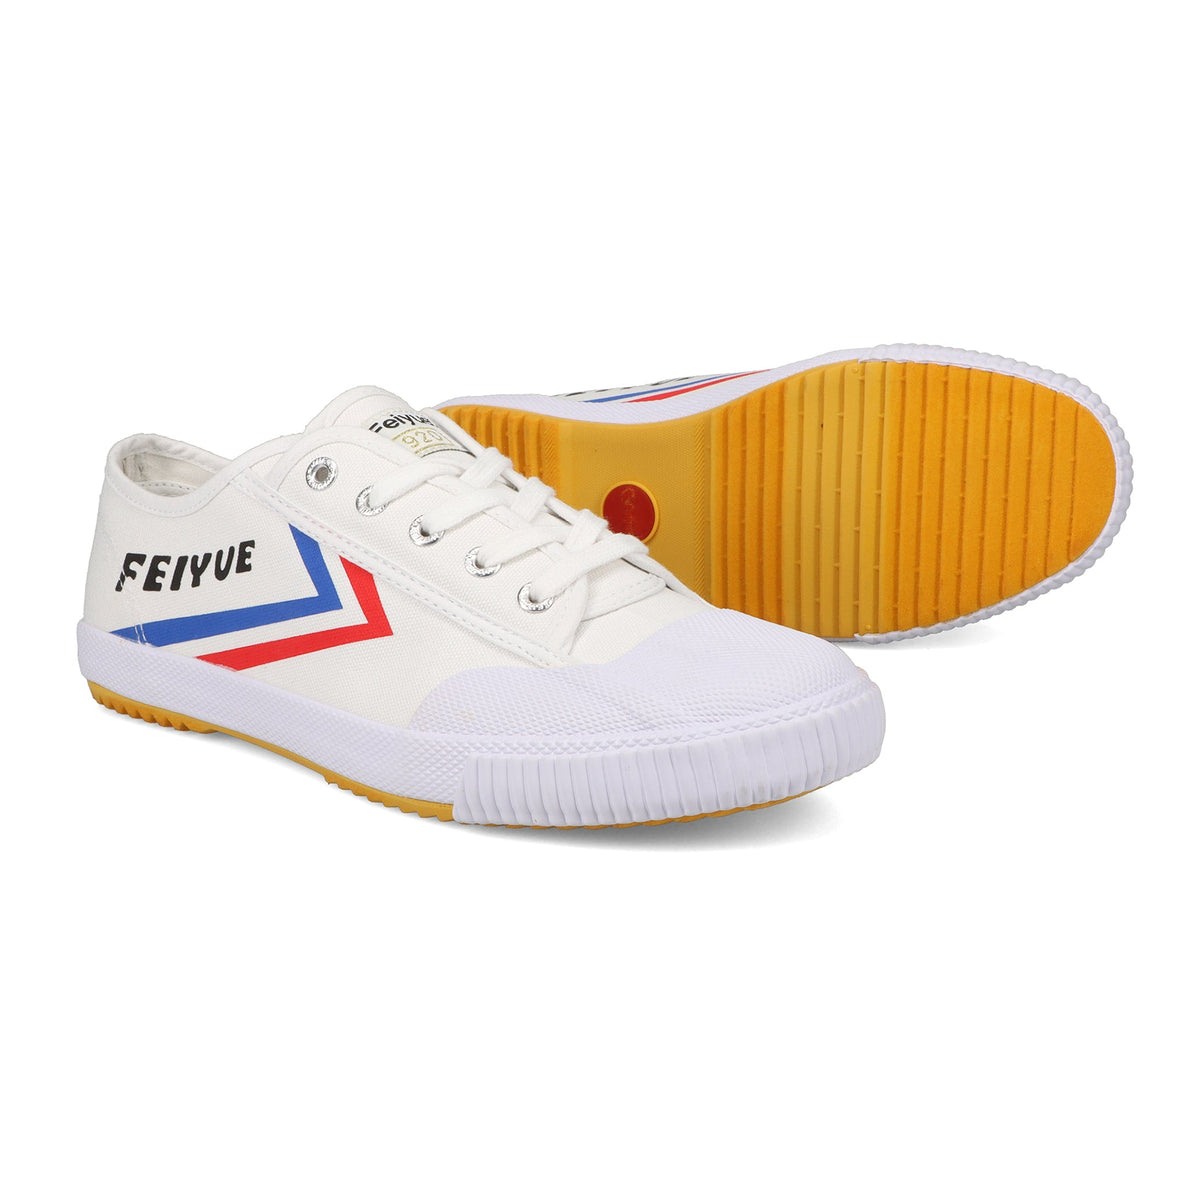 Feiyue Canvas Sneakers for Martial Arts Training Shoes in Plimsoll Design  Fe Lo 1920 Red